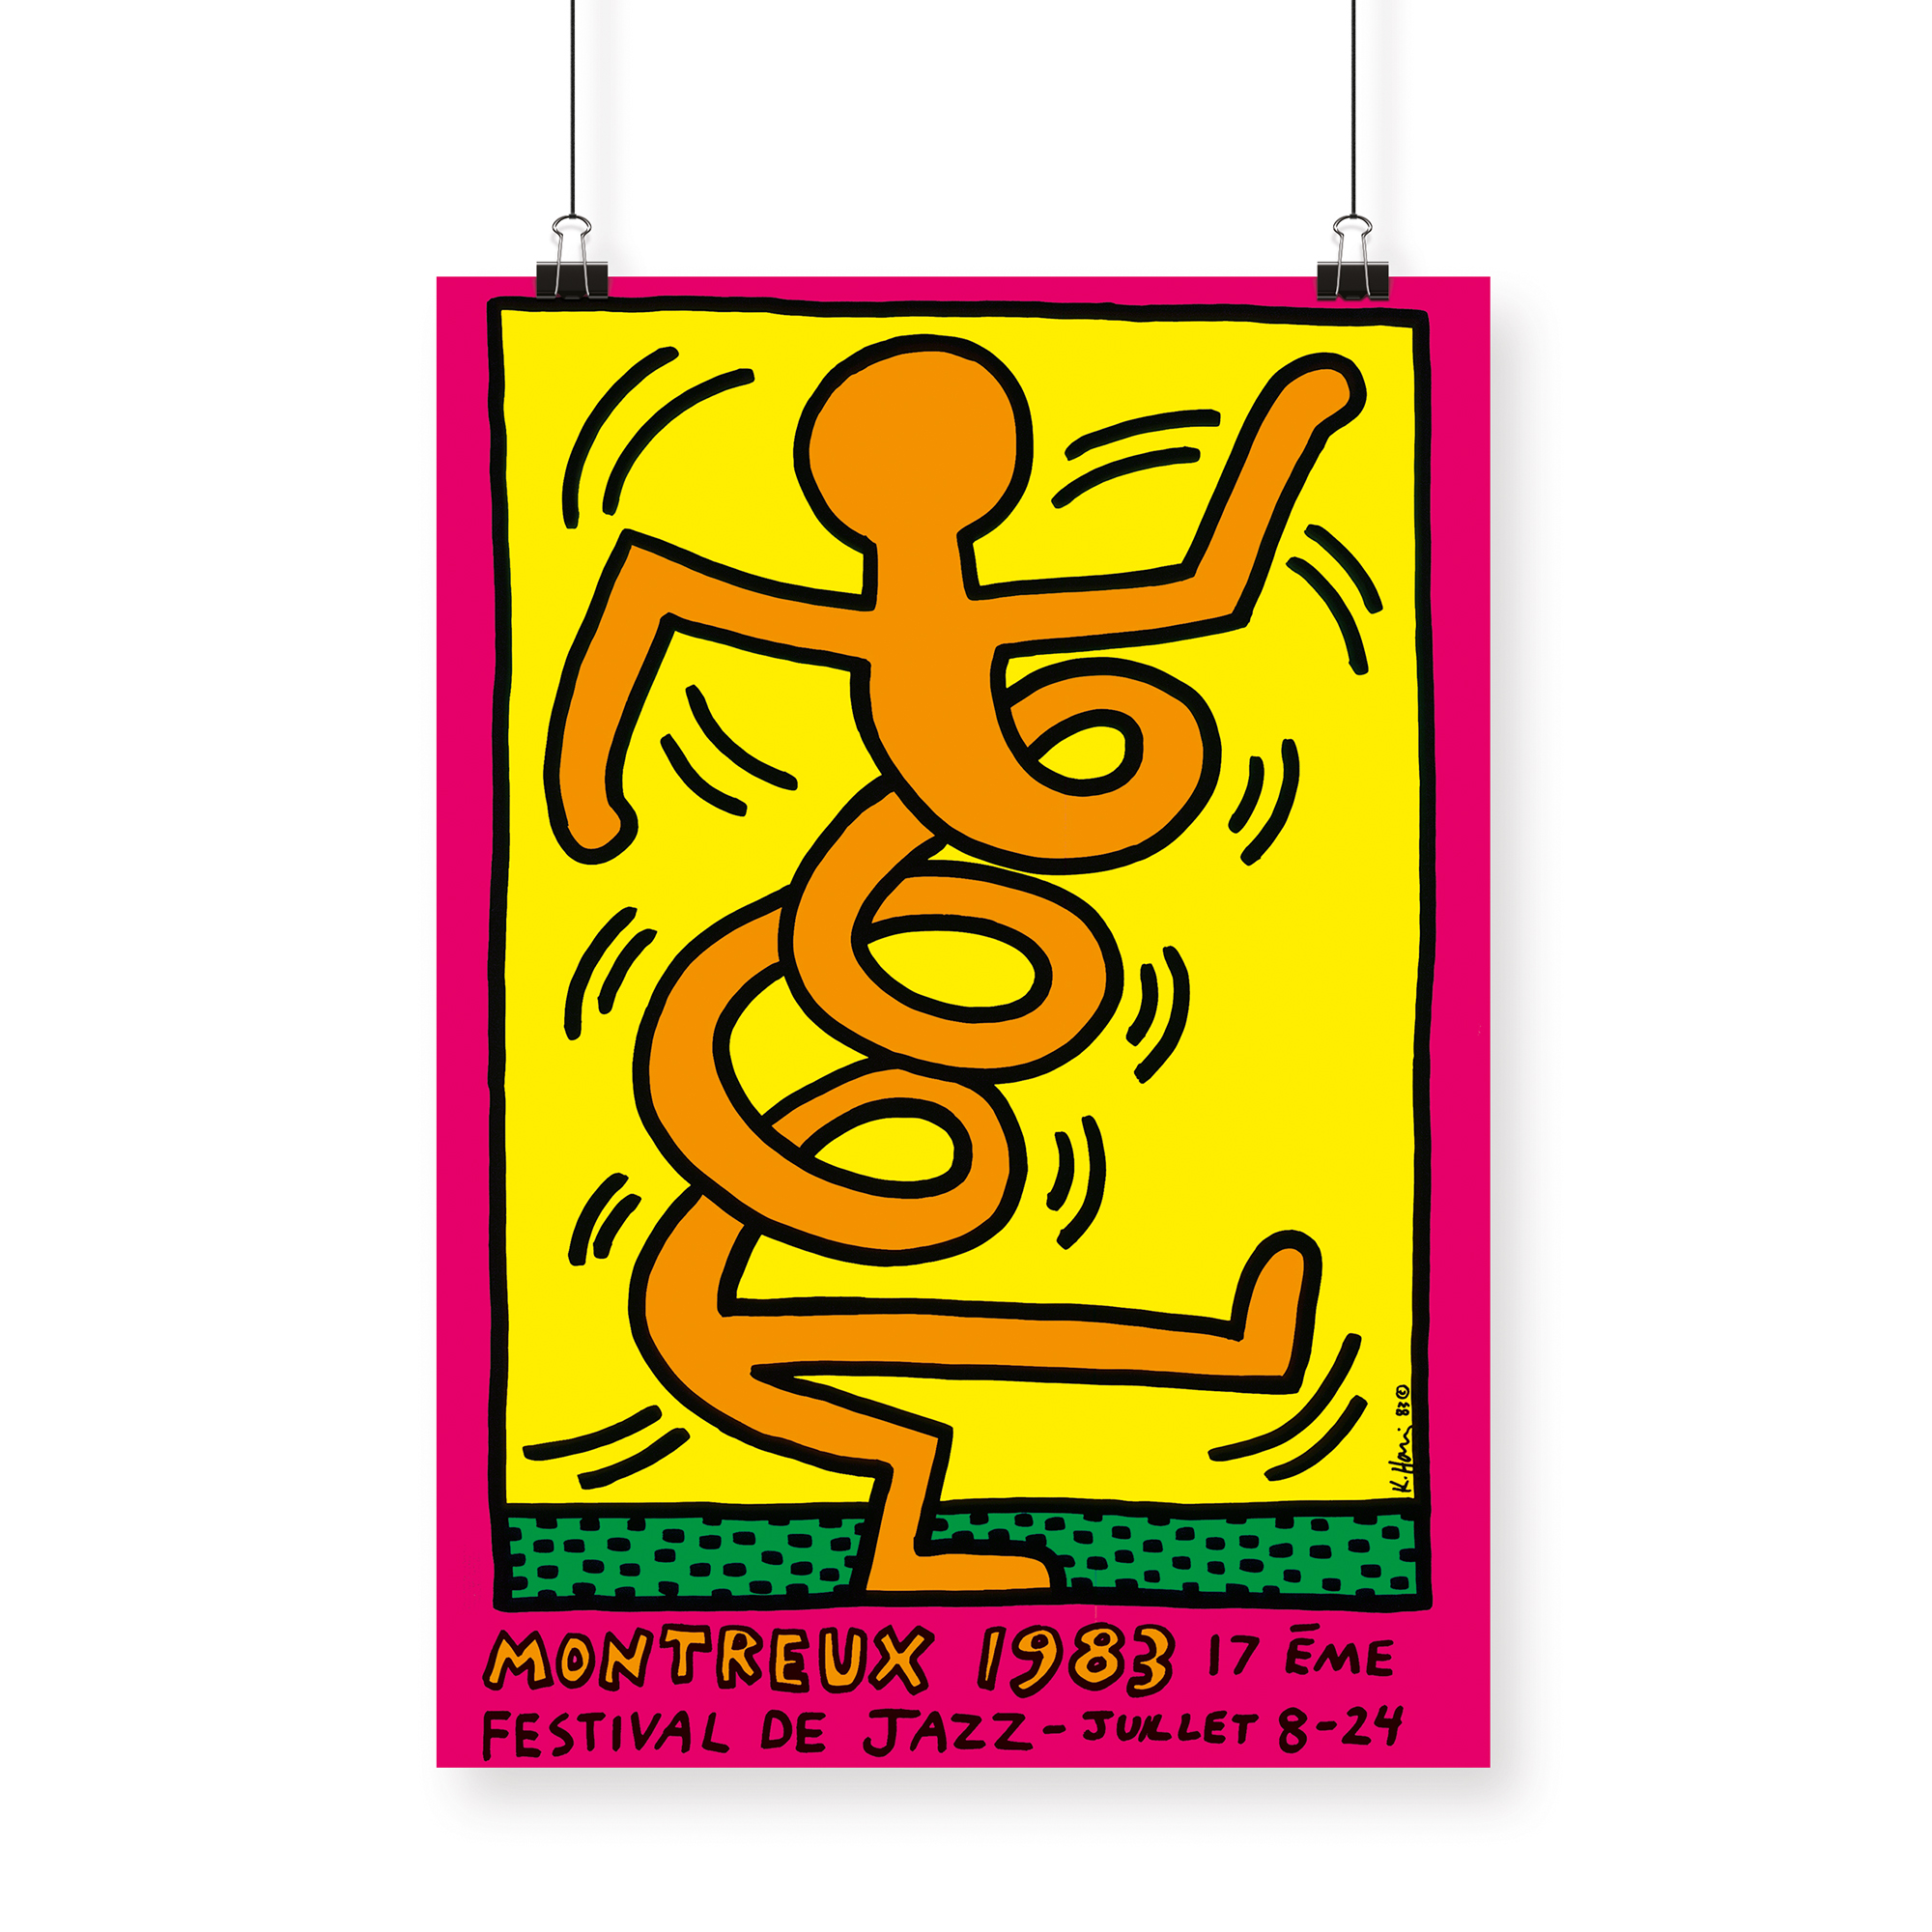 Keith Haring's 1983 Montreux Jazz Festival poster.